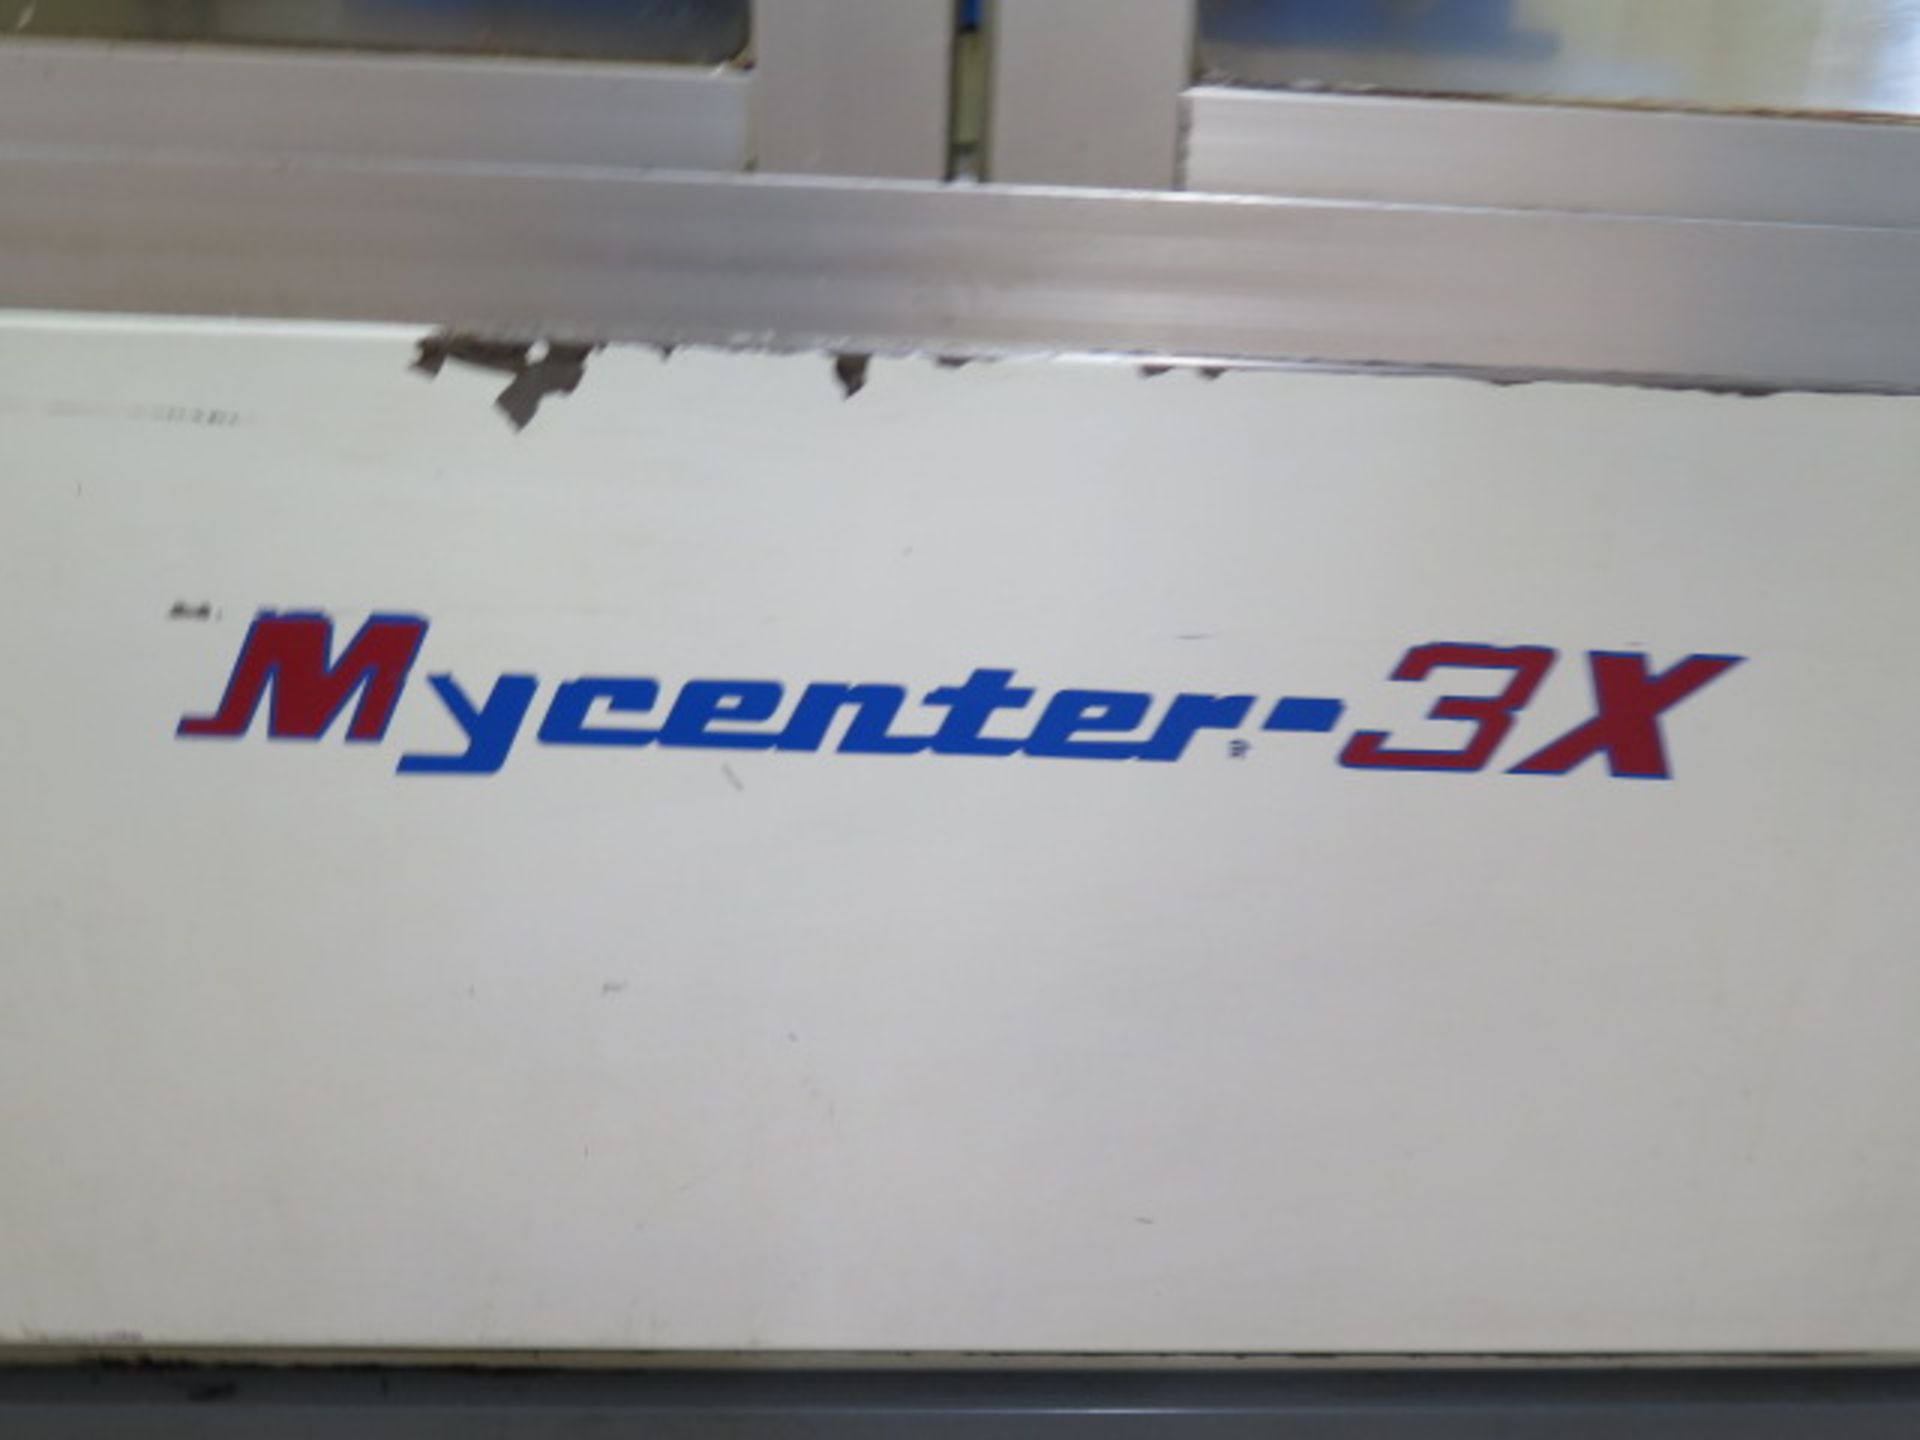 Kitamura Mycenter-3x CNC VMC s/n 11710 w/ Yasnac Controls, 24-Station STC, SOLD AS IS - Image 11 of 13